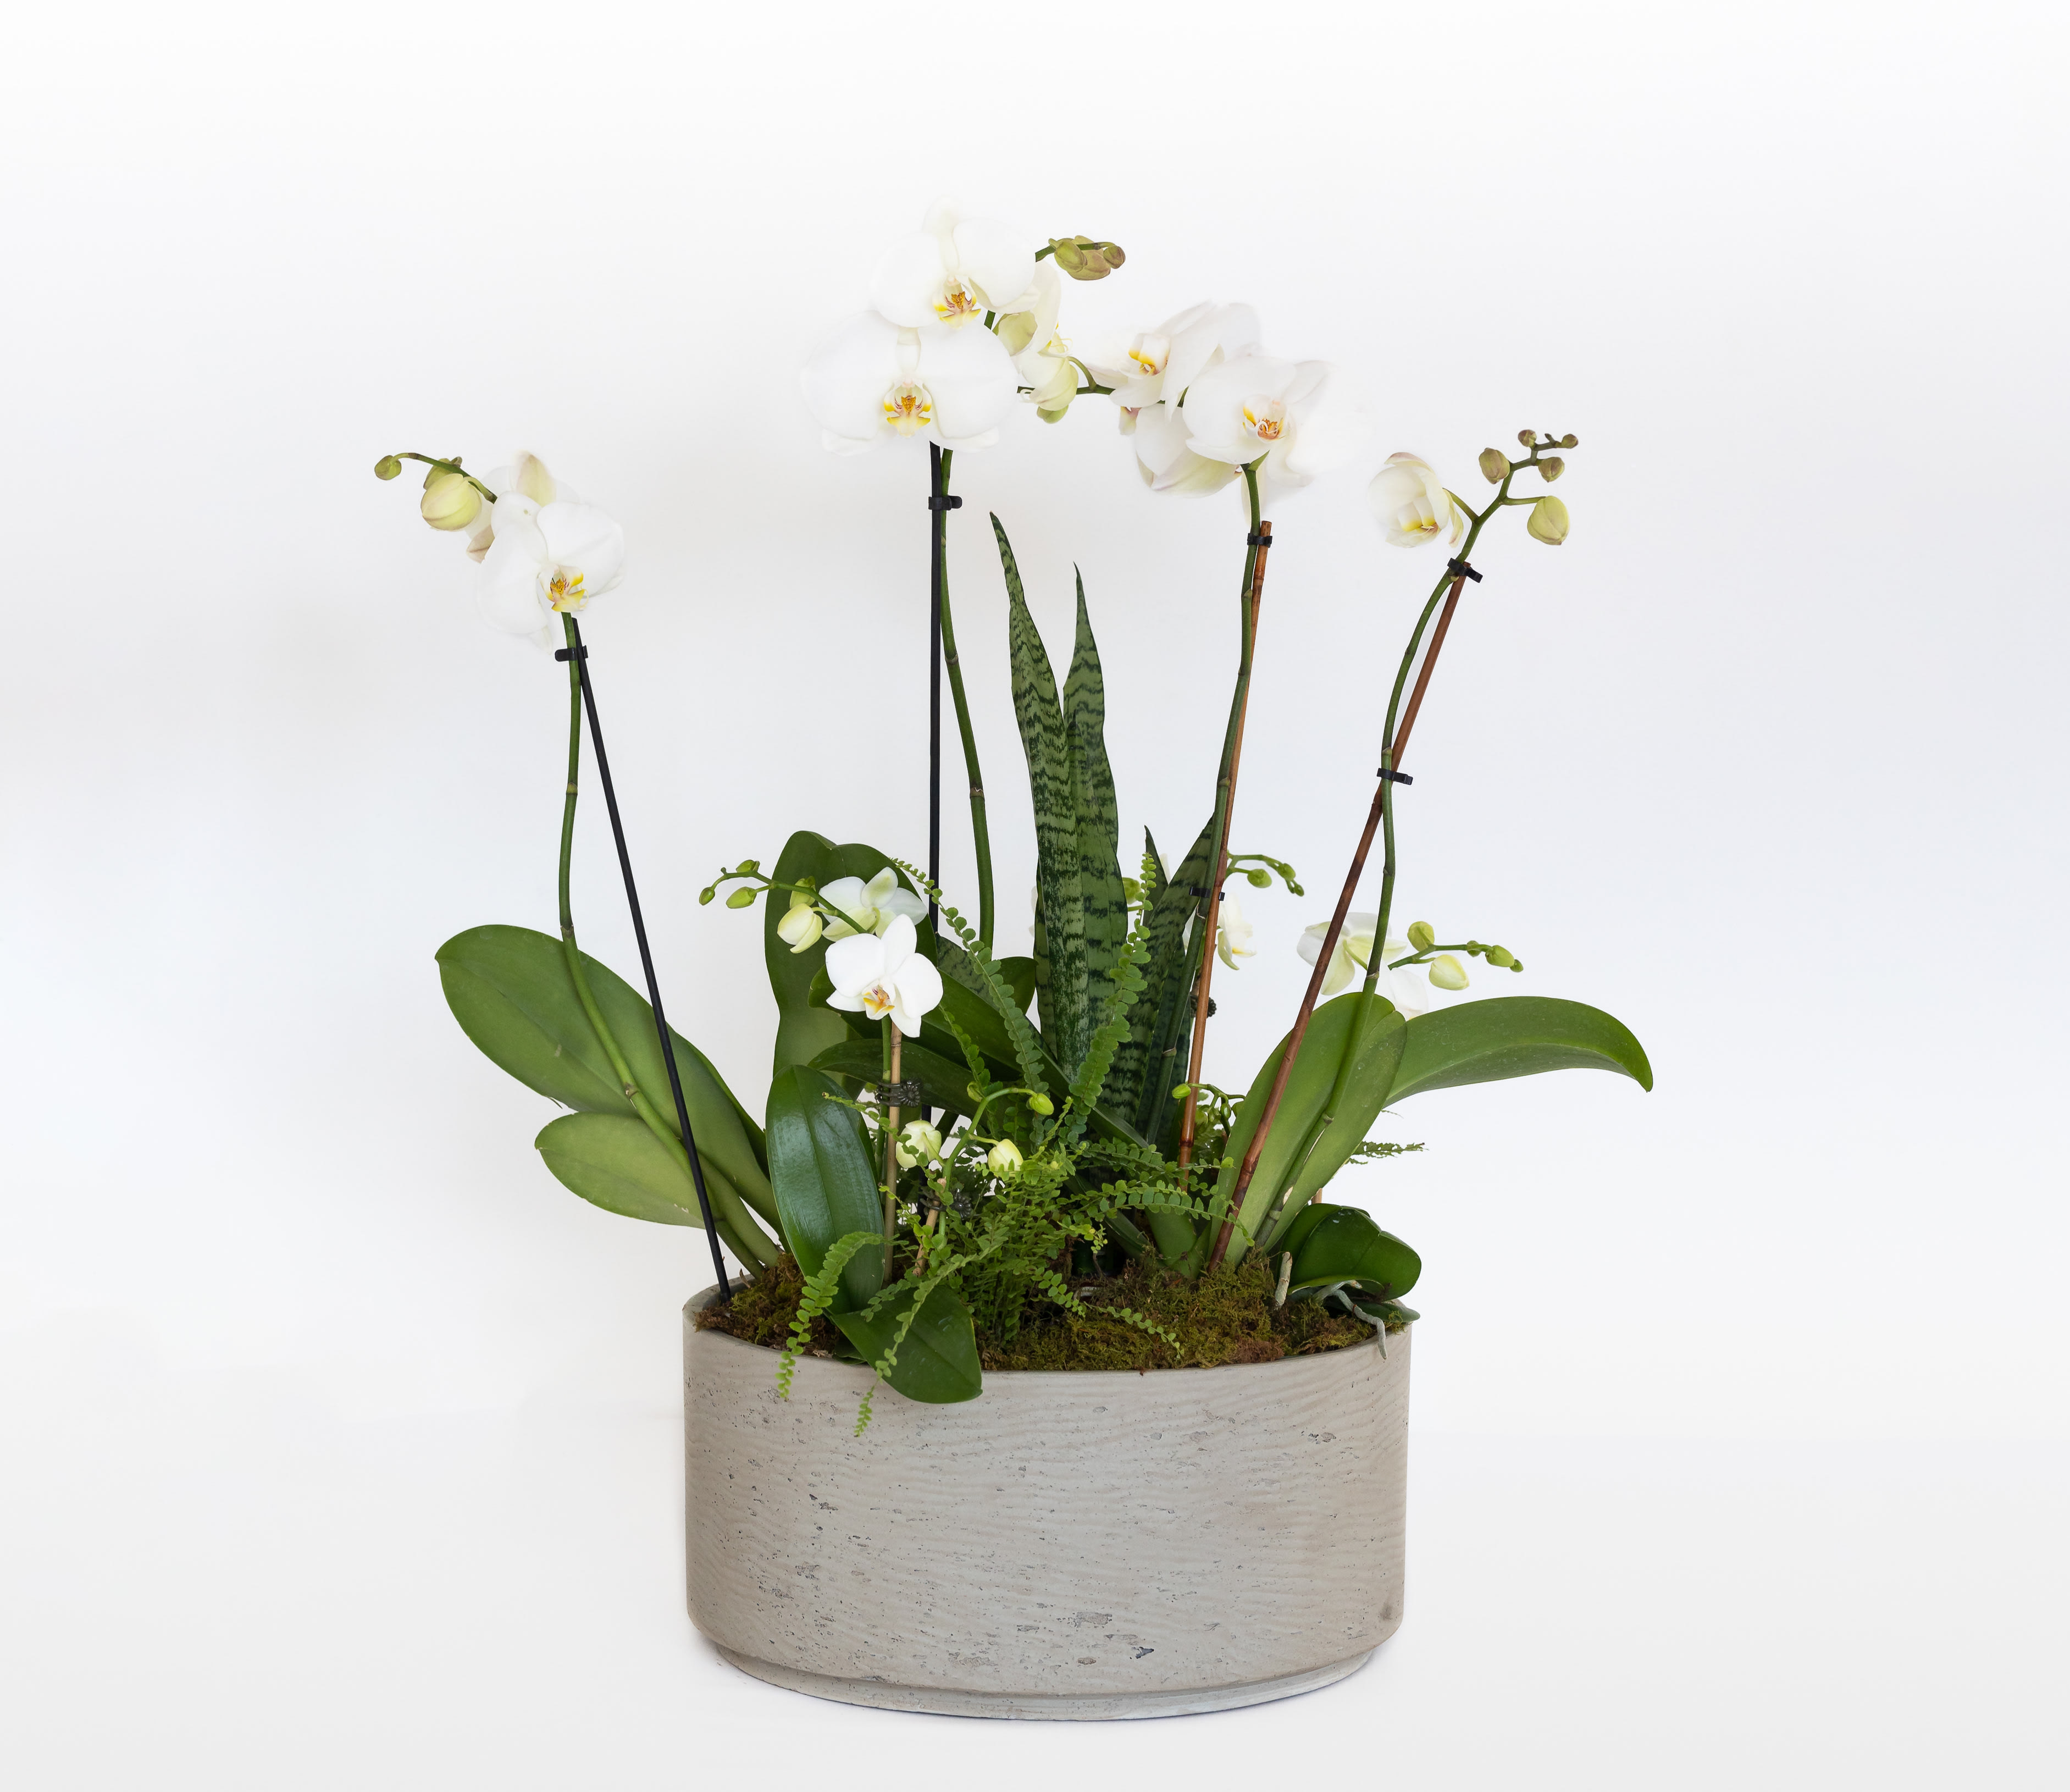 Orchids On Display  - Orchids like you've never seen them! Large and fresh - six orchid plants (3 small plants and 3 large 2-stem plants) with 4 mini fern plants nestled into a gorgeous modern gray stone vessel. All accented with fresh moss. The &quot;wow&quot; factor is in full force here. Perfect for saying thank you, I care about you in a BIG way. Also a lovely piece for an office or business.   Plant display is 24&quot; tall and 18&quot; wide. This arrangement weighs about 25 pounds.    Plant is approximately 35&quot;x 12&quot;.   COVID NOTICE: Due to an international shortage of flowers and vases and floral supply chain issues, it may be necessary to substitute similar flowers and the vase used in this design. We always strive to create a design as close as possible to the design shown. If you have any questions regarding these changes, please call and talk to a team member before placing your order, (703) 779-3530.